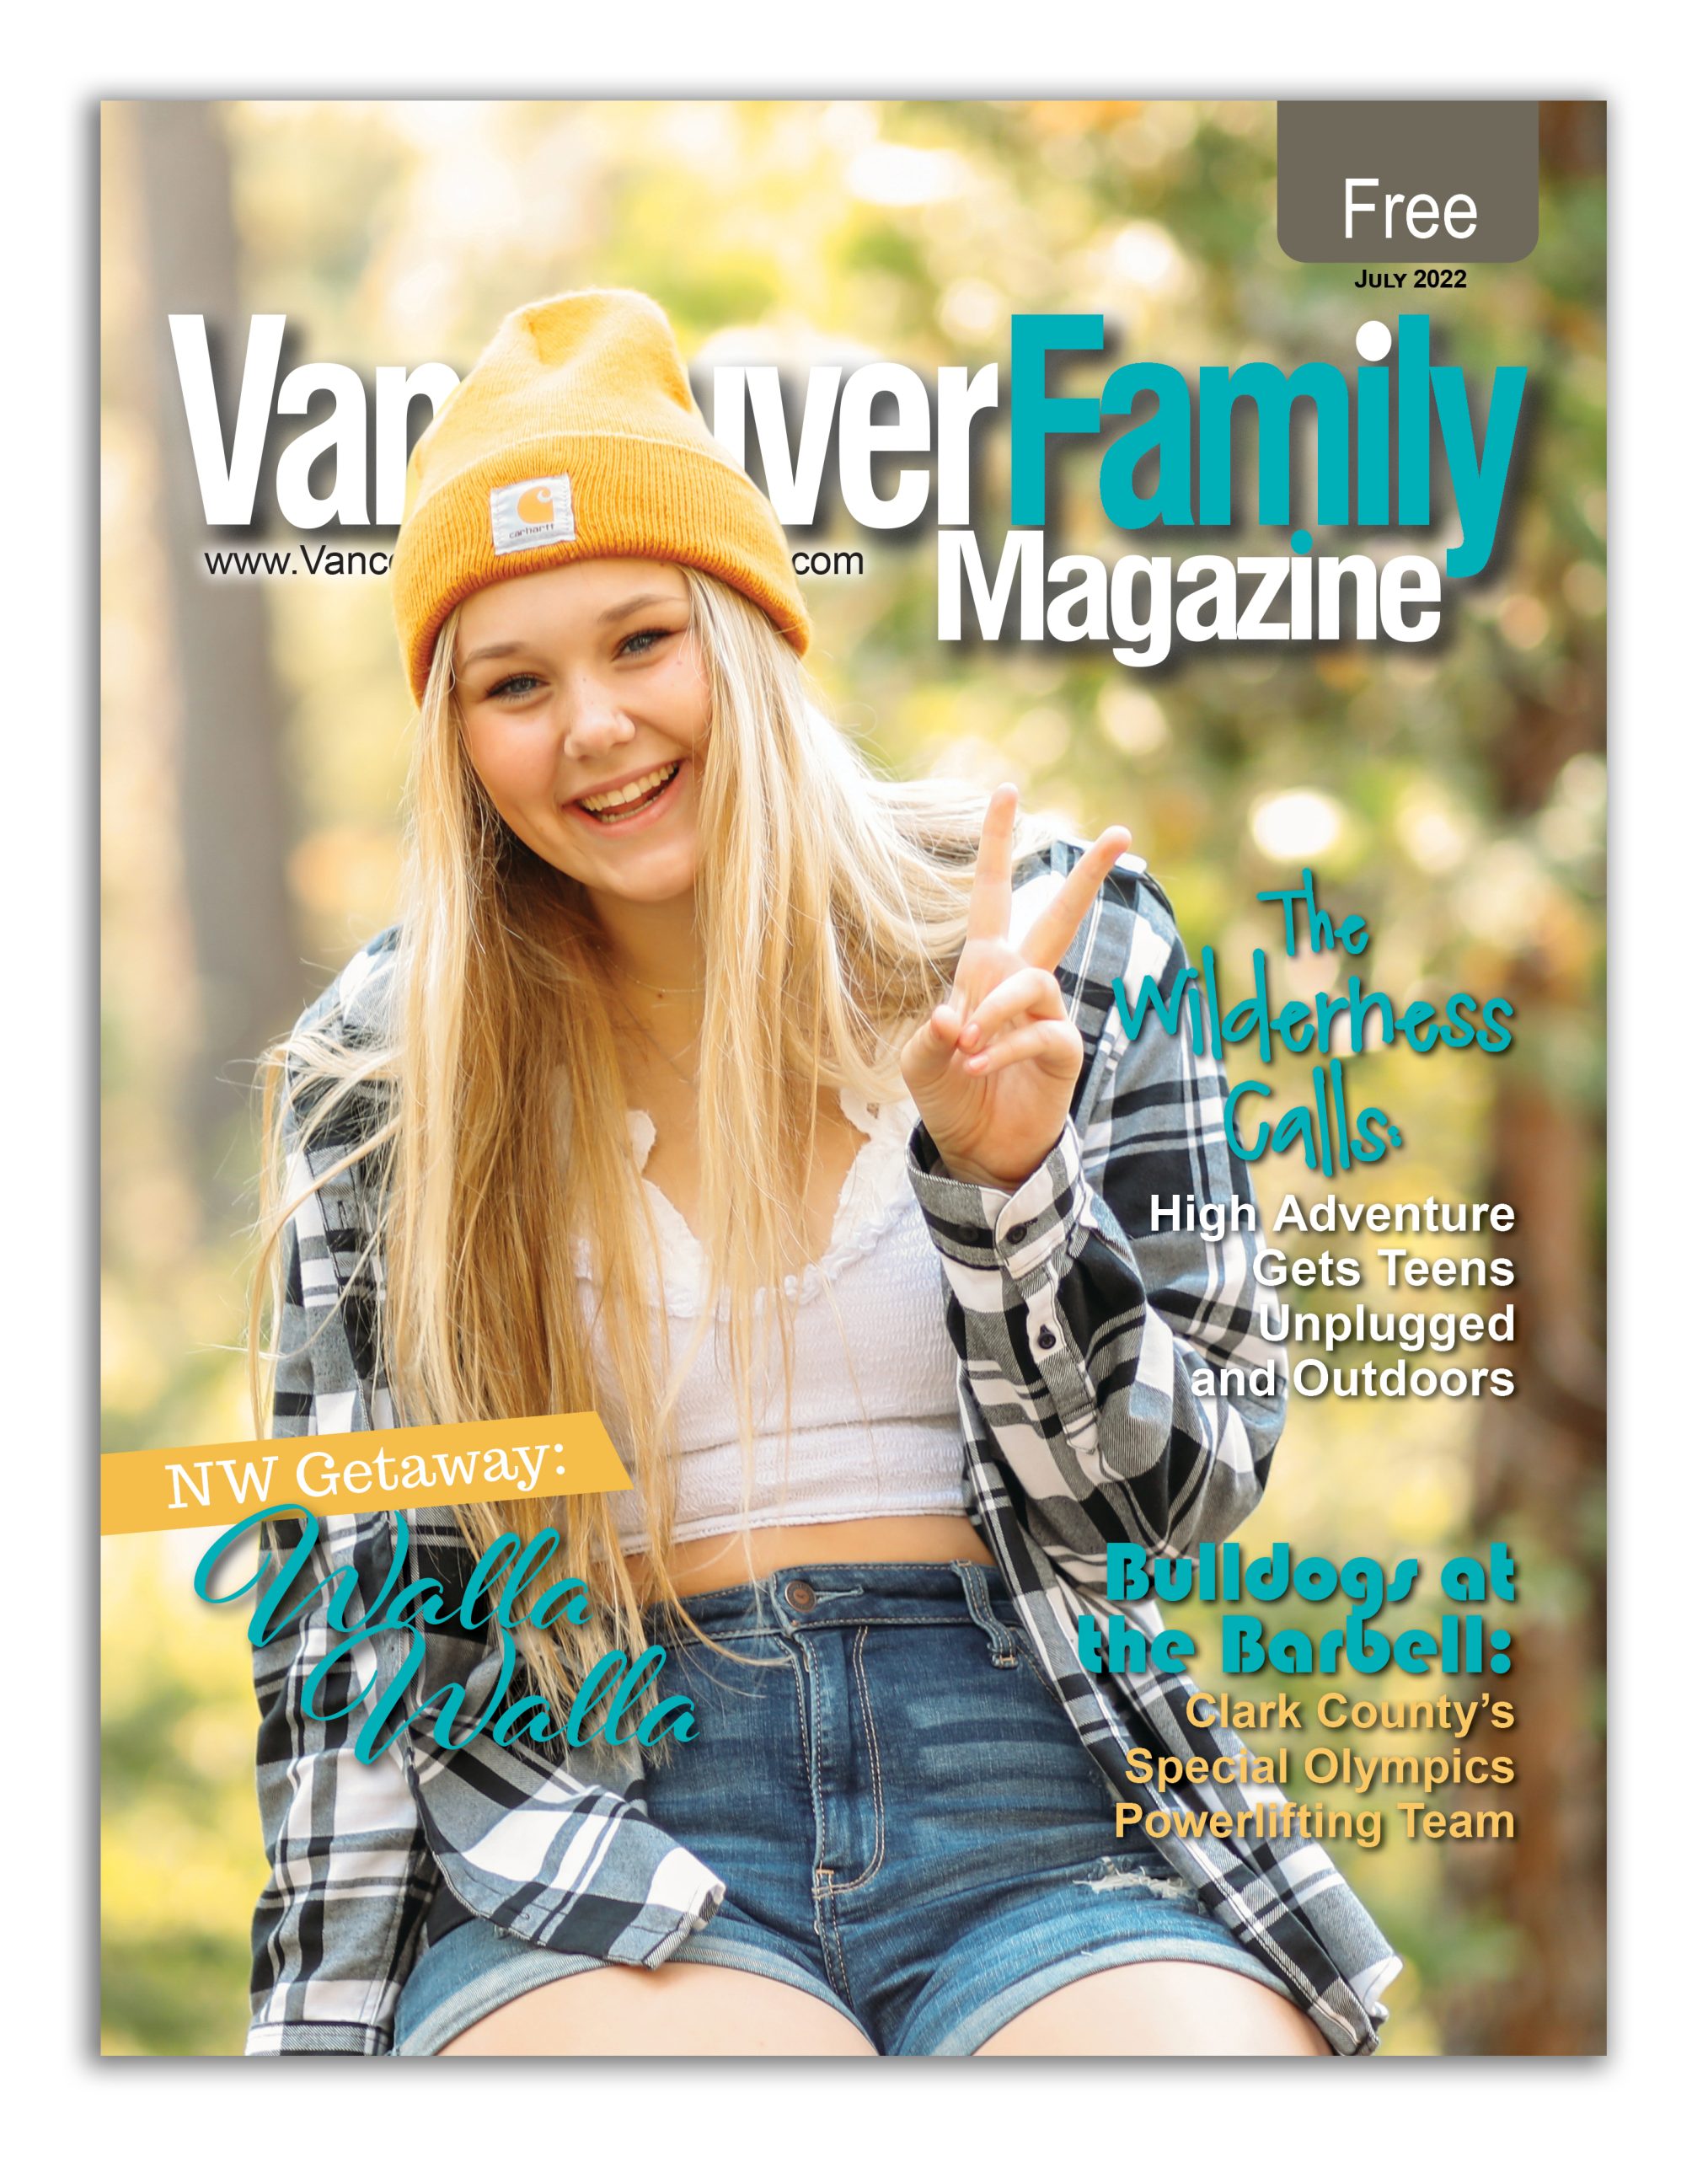 Vancouver Family Magazine's July 2022 issue cover features a teen girl with long blonde hair and a beanie cap smiling and making a "peace" sign with her left hand